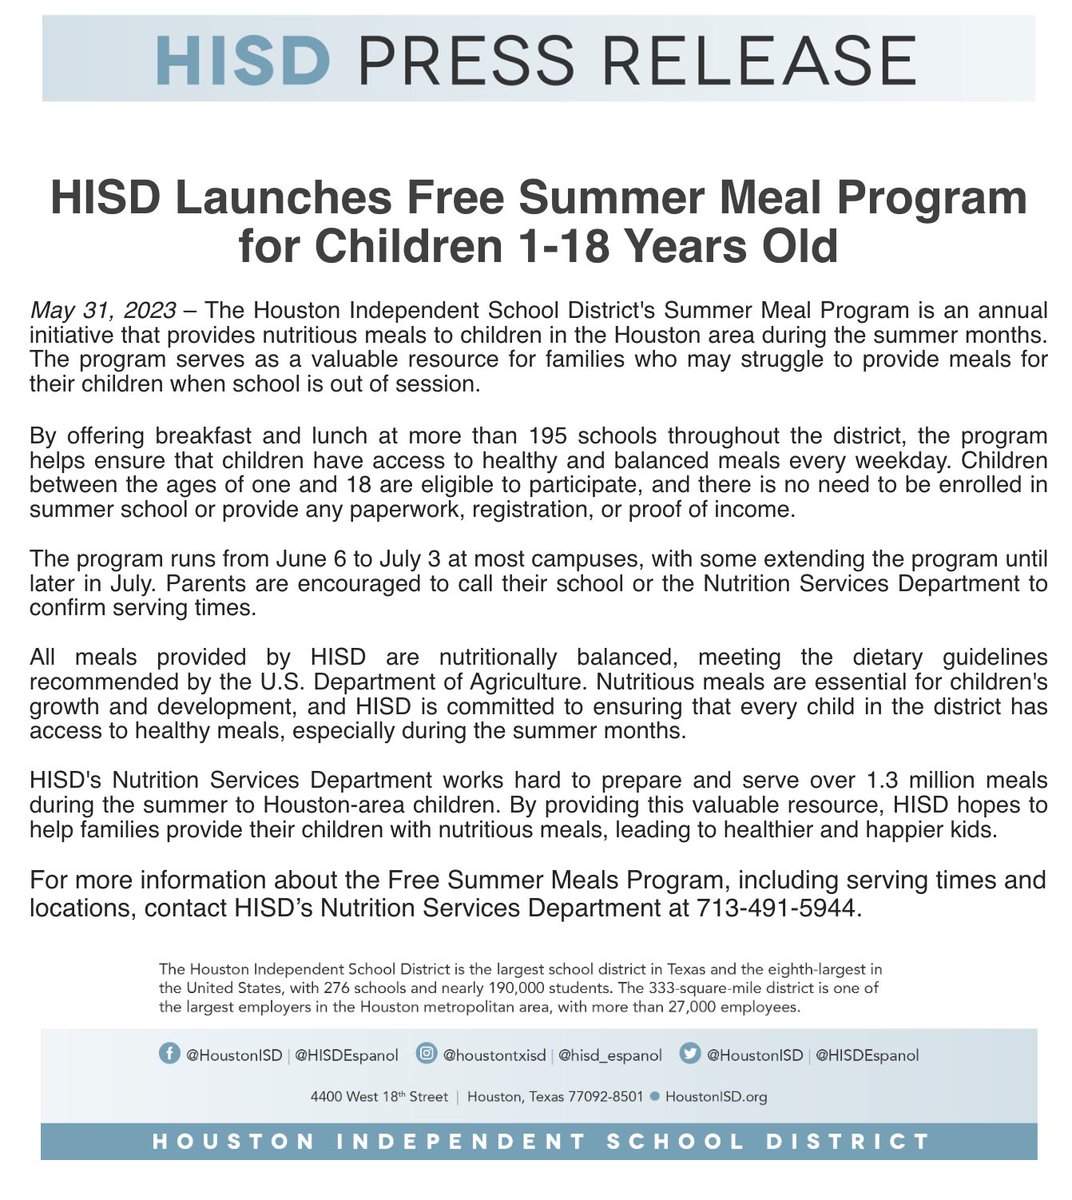 Free Summer Meal Program for Children 1-18 Years Old.